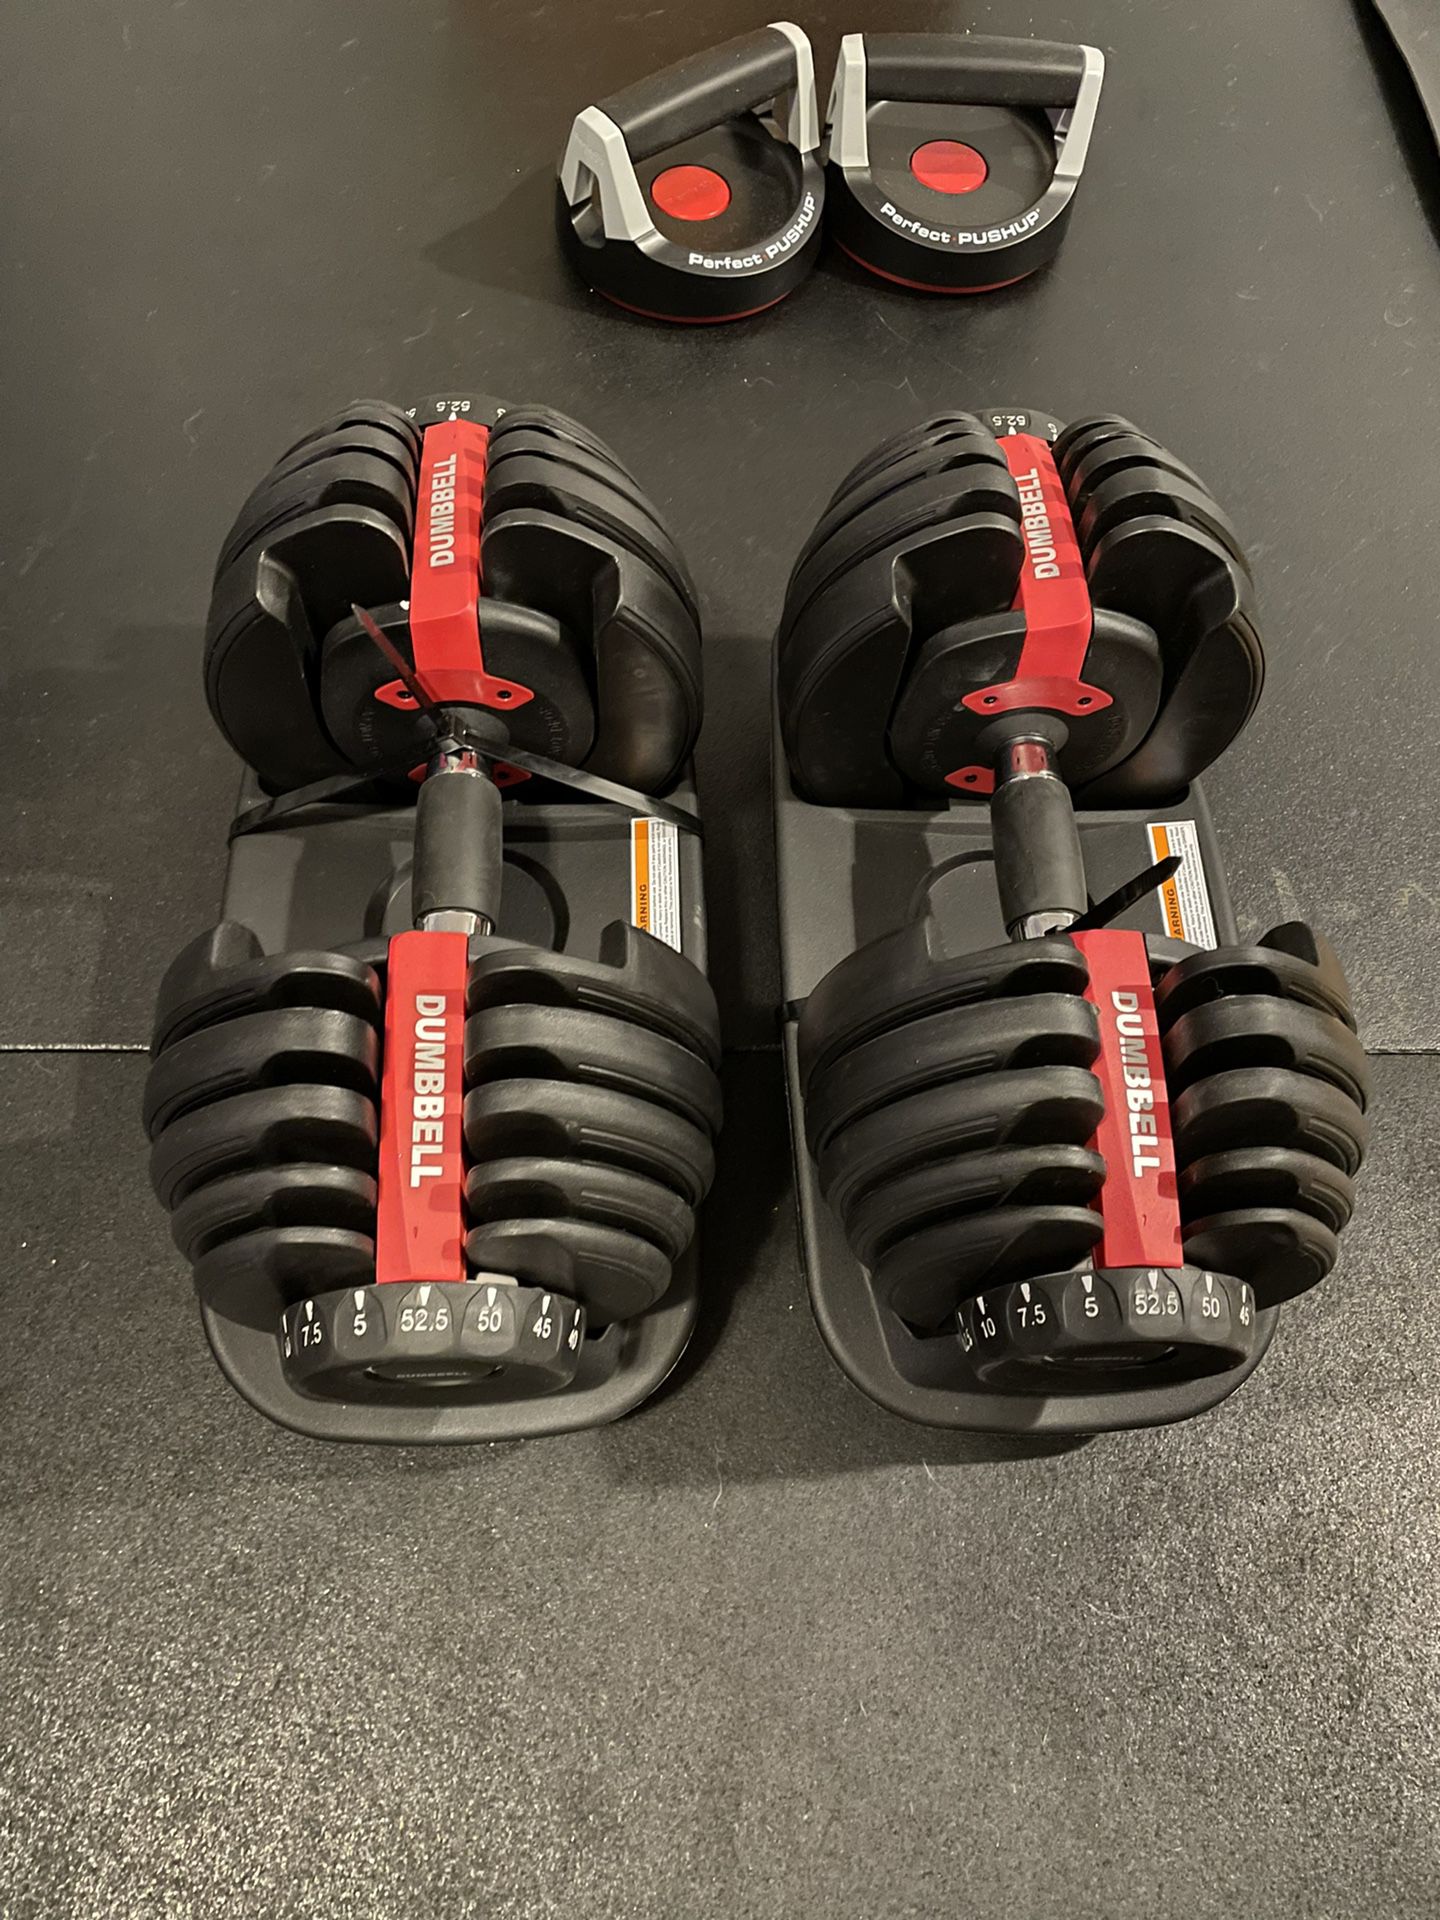 New 52.5lb Adjustable Dumbbells *similar to Bowflex* $190 for the pair - Only Three Pairs Left